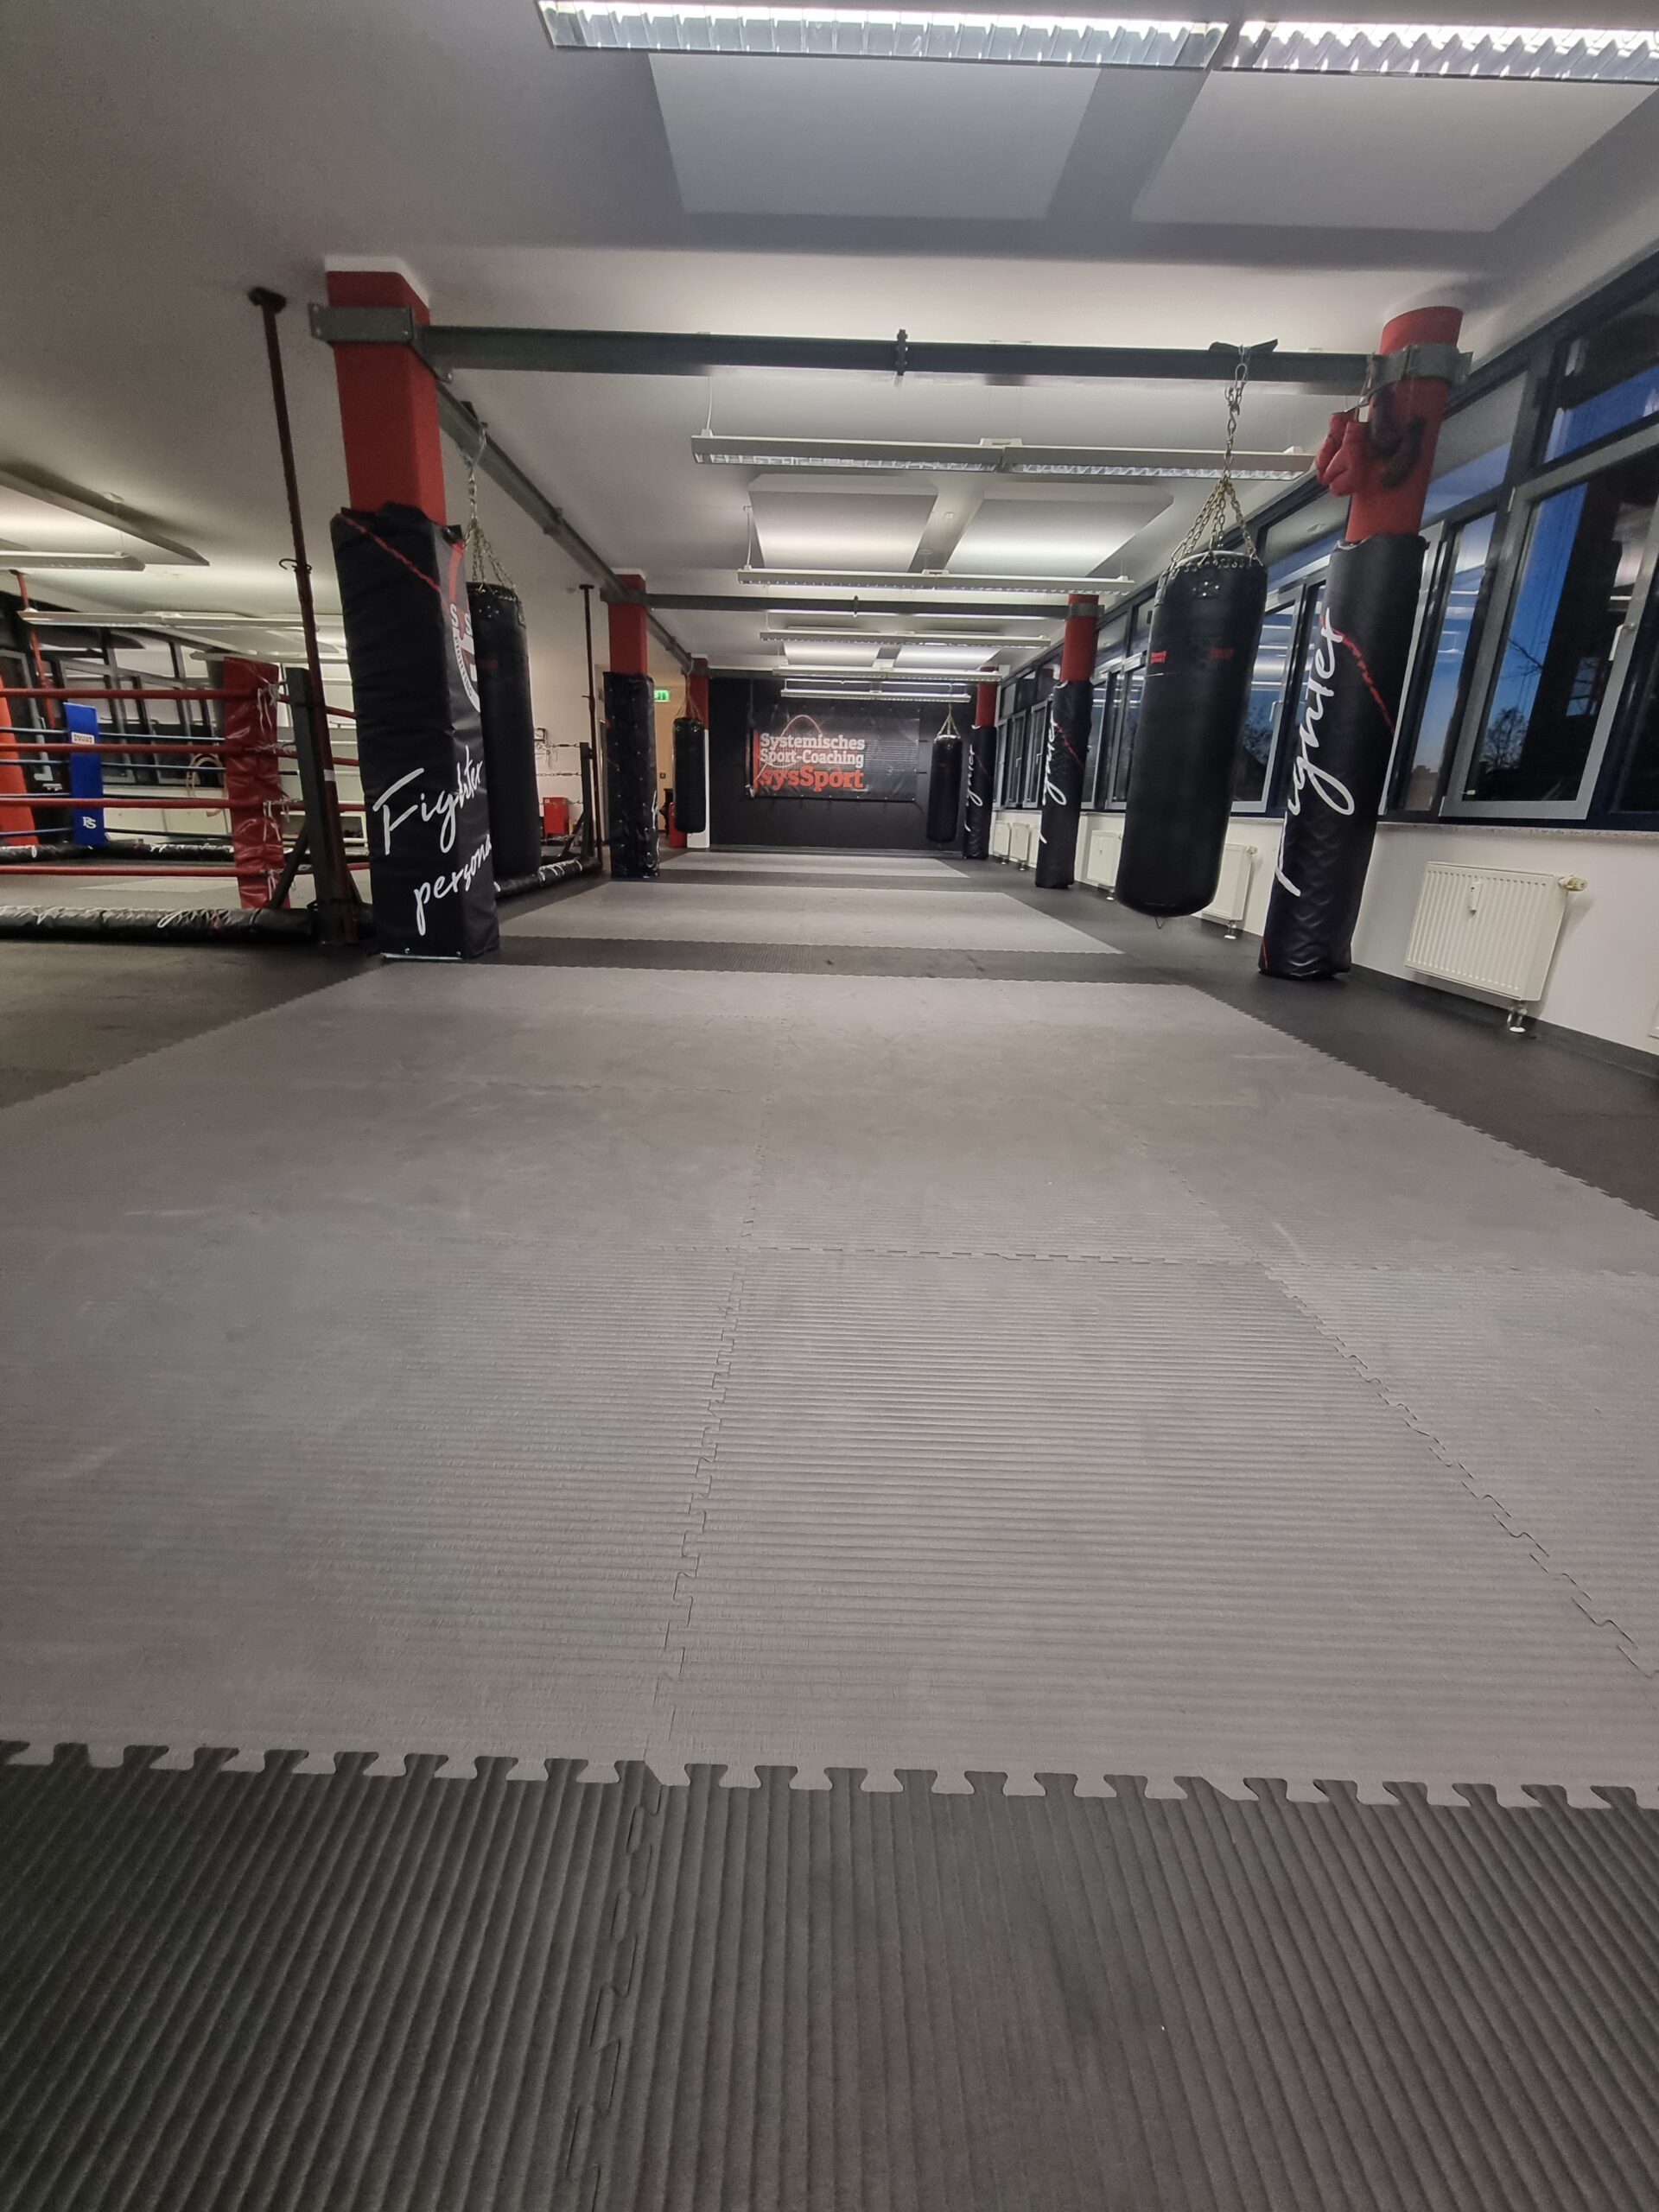 sysSport Boxgym in München Trudering